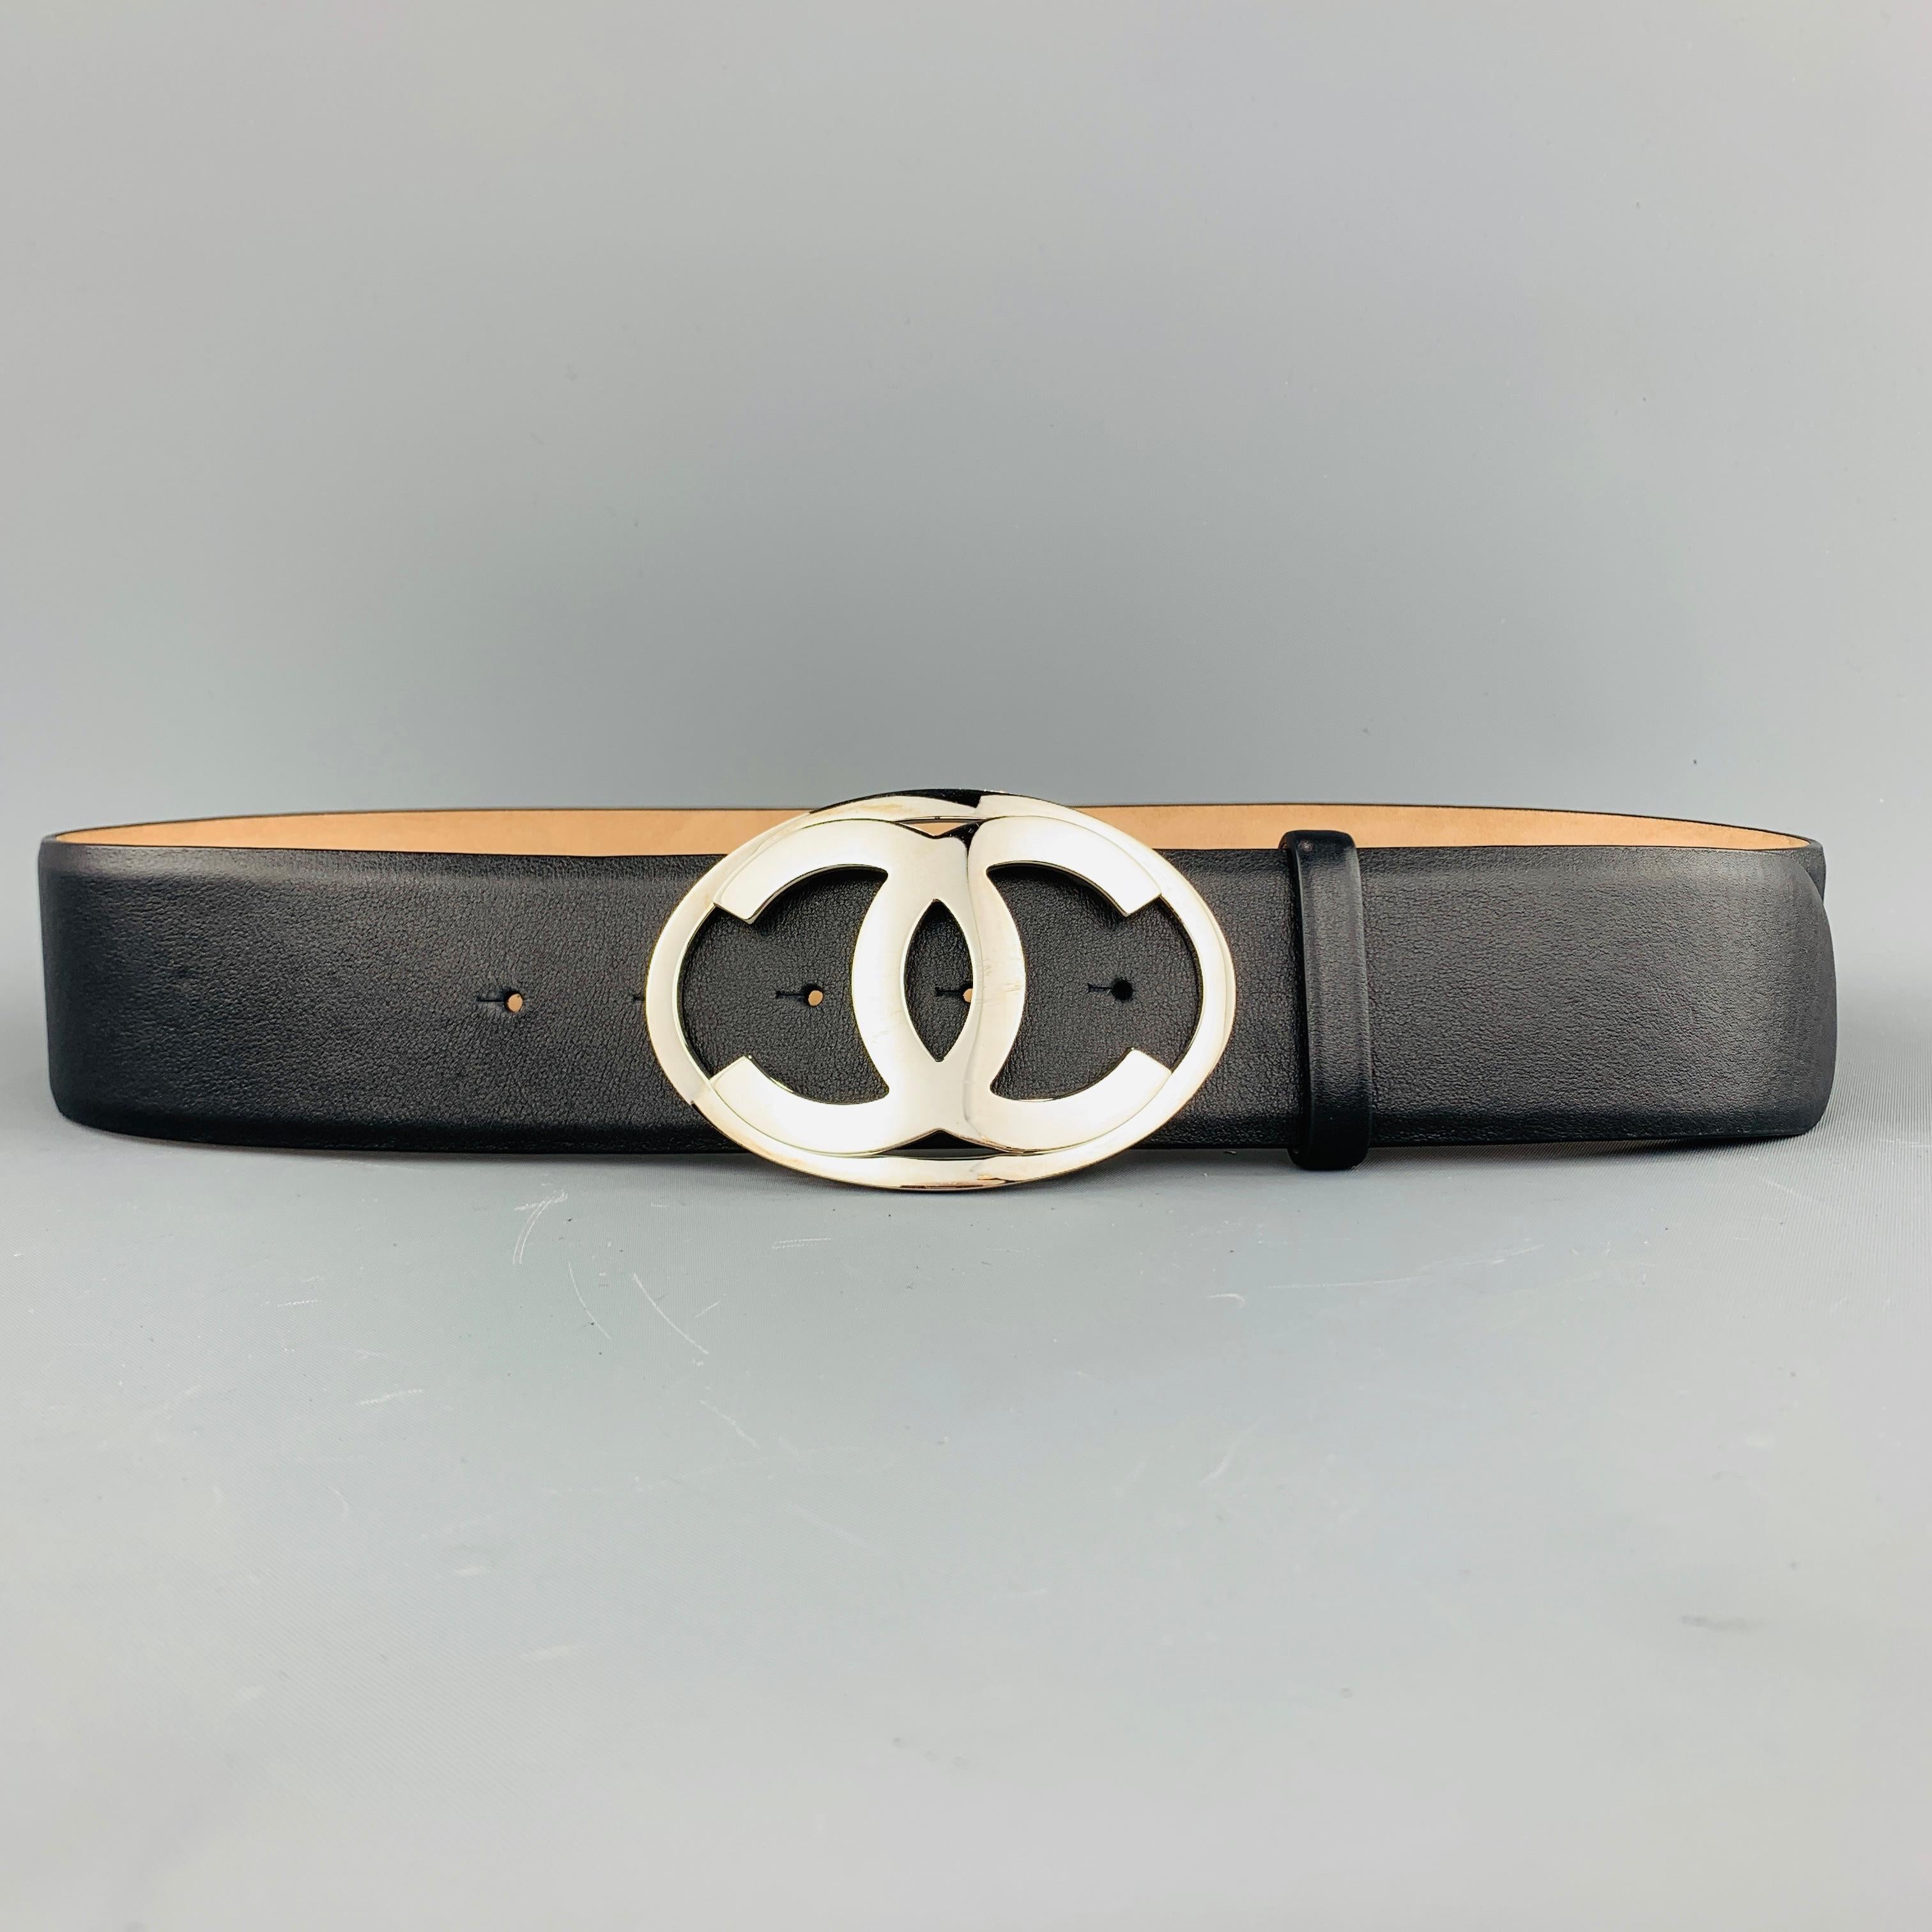 CHANEL Spring Summer 2005 Collection belt features a thick black leather strap with a polished silver tone oval CC logo cutout buckle. Wear on buckle. As-is. Made in Italy.
 
Good Pre-Owned Condition.
Marked: 05 P  95/38
 
Length: 39 in.
Width: 2